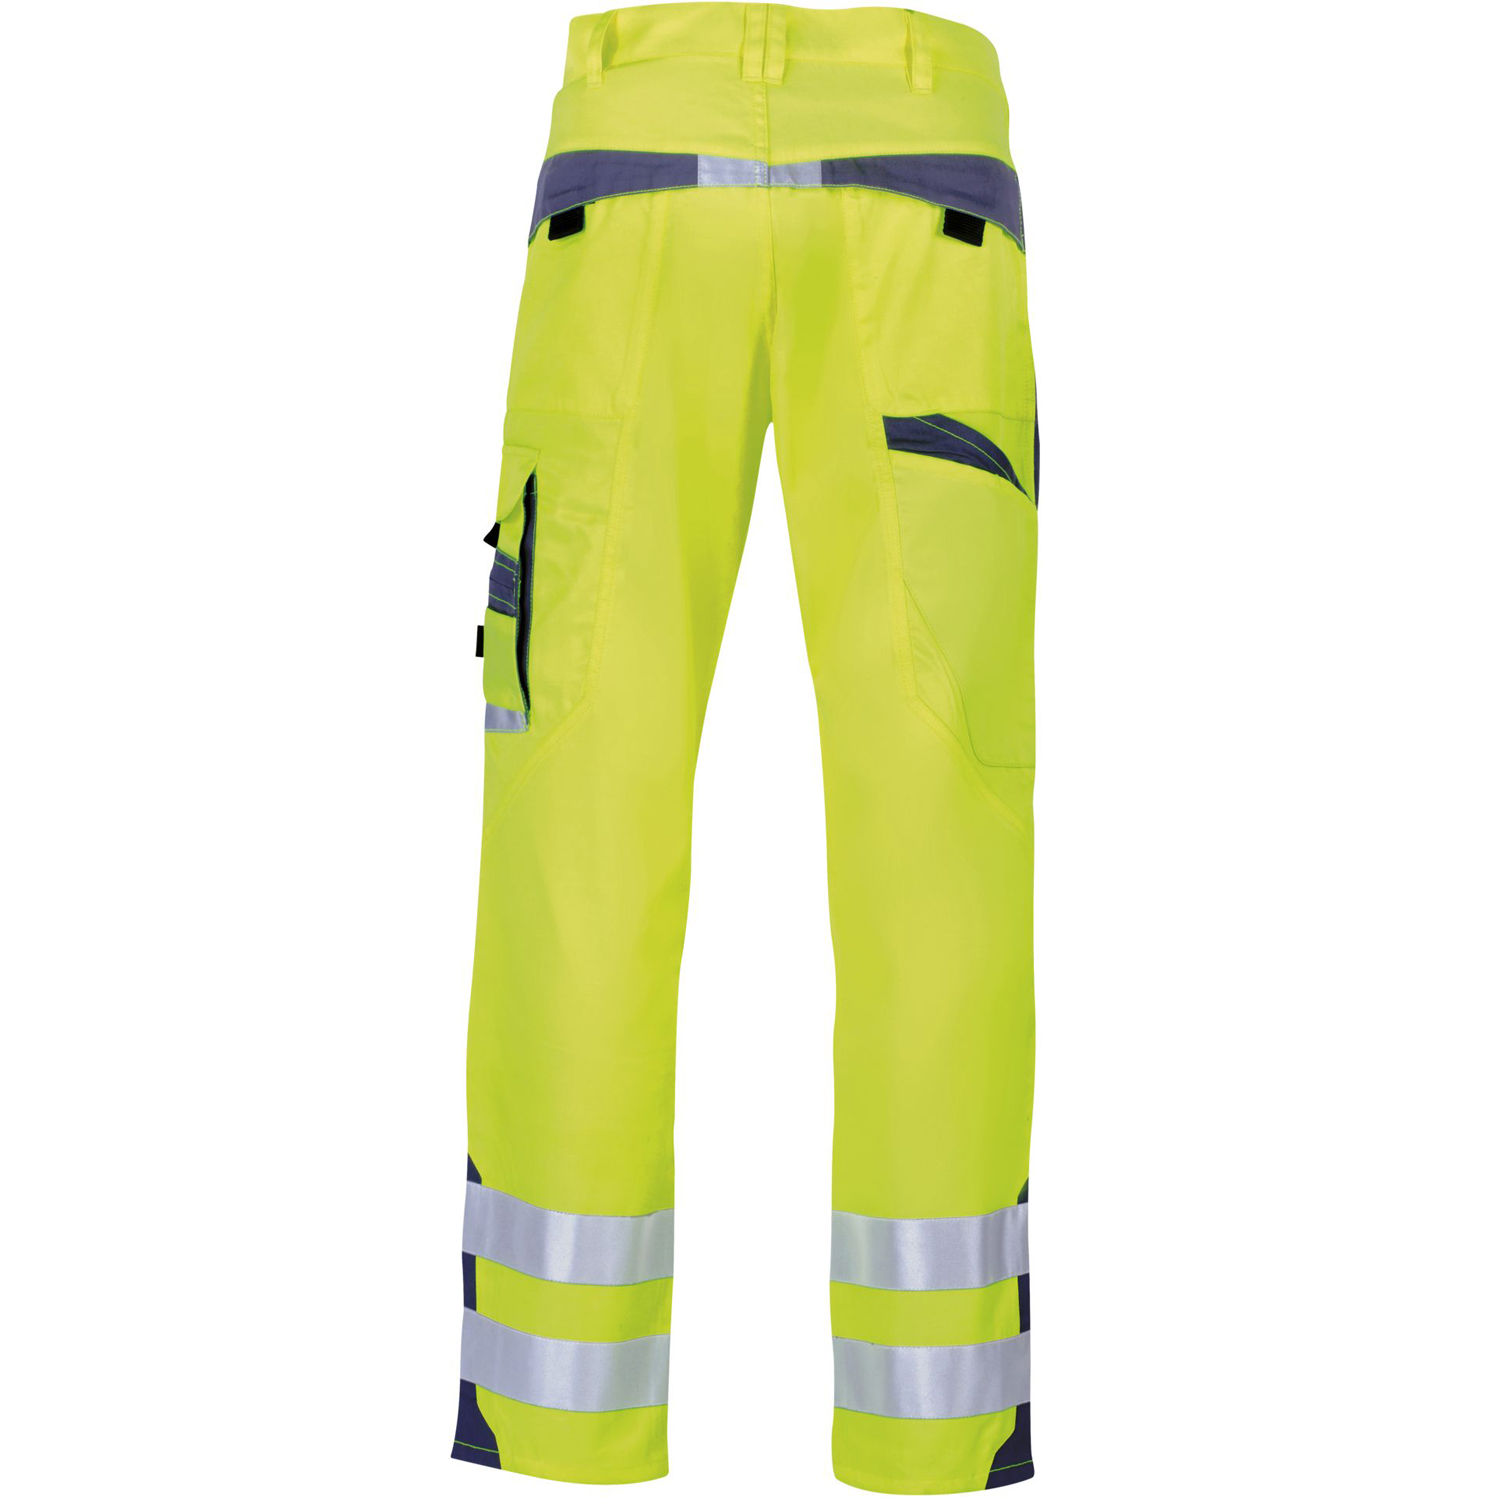 Working trousers in yellow by PKA Klöcker in large sizes 58-66